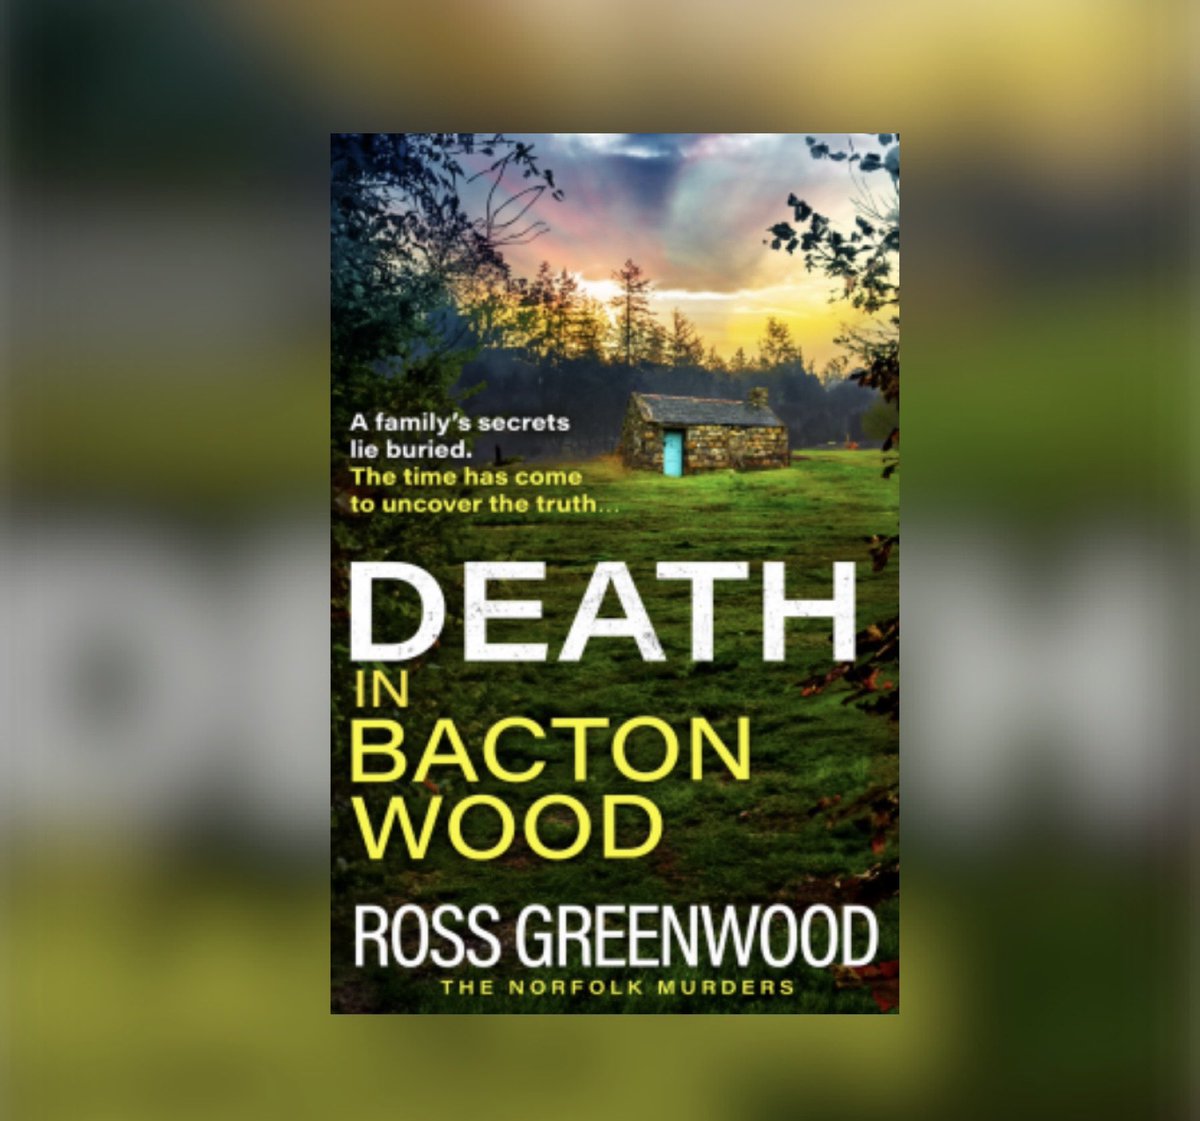 Delighted to be opening the blog tour for another fabulous book in the @greenwoodross Norfolk Murder Series @rararesources @BoldwoodBooks goodreads.com/review/show/64…